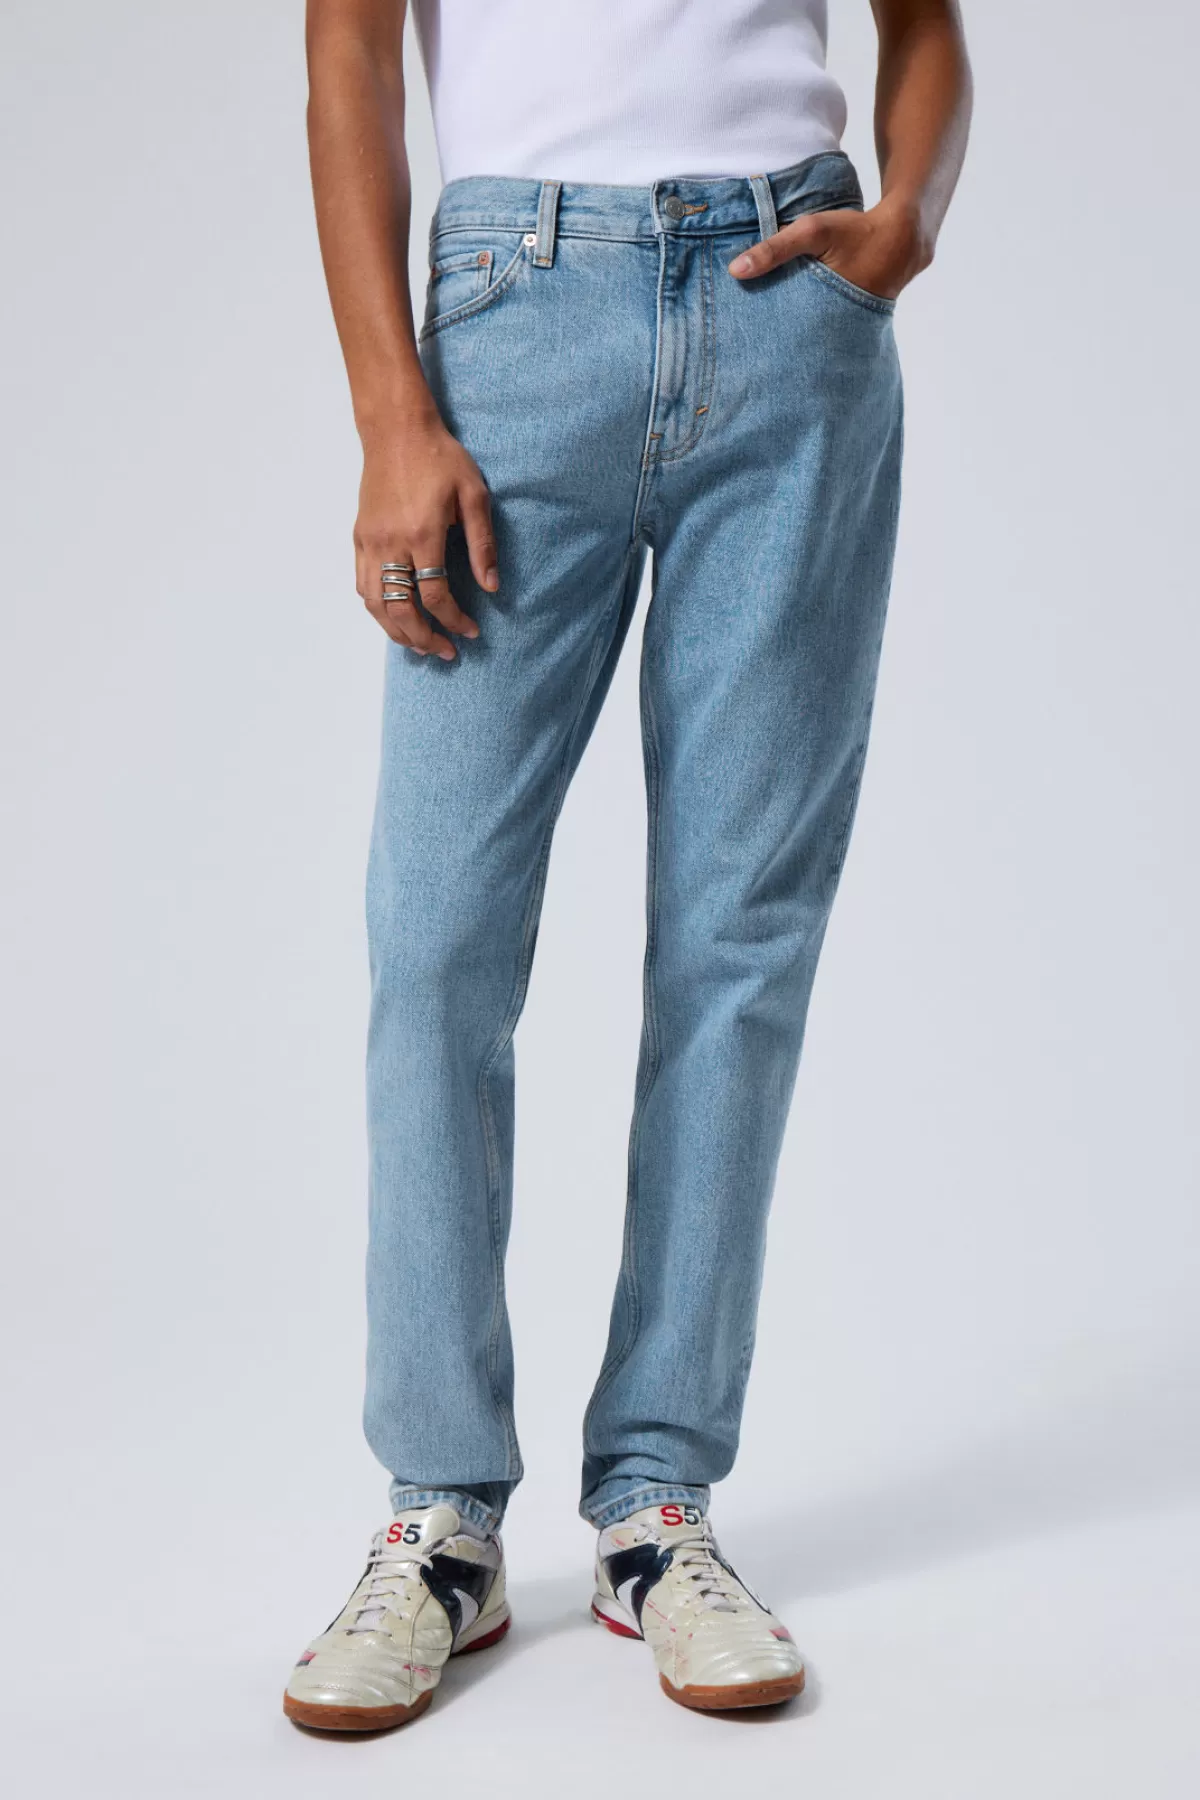 Weekday Sunday Slim Tapered Jeans Cerulean blue New